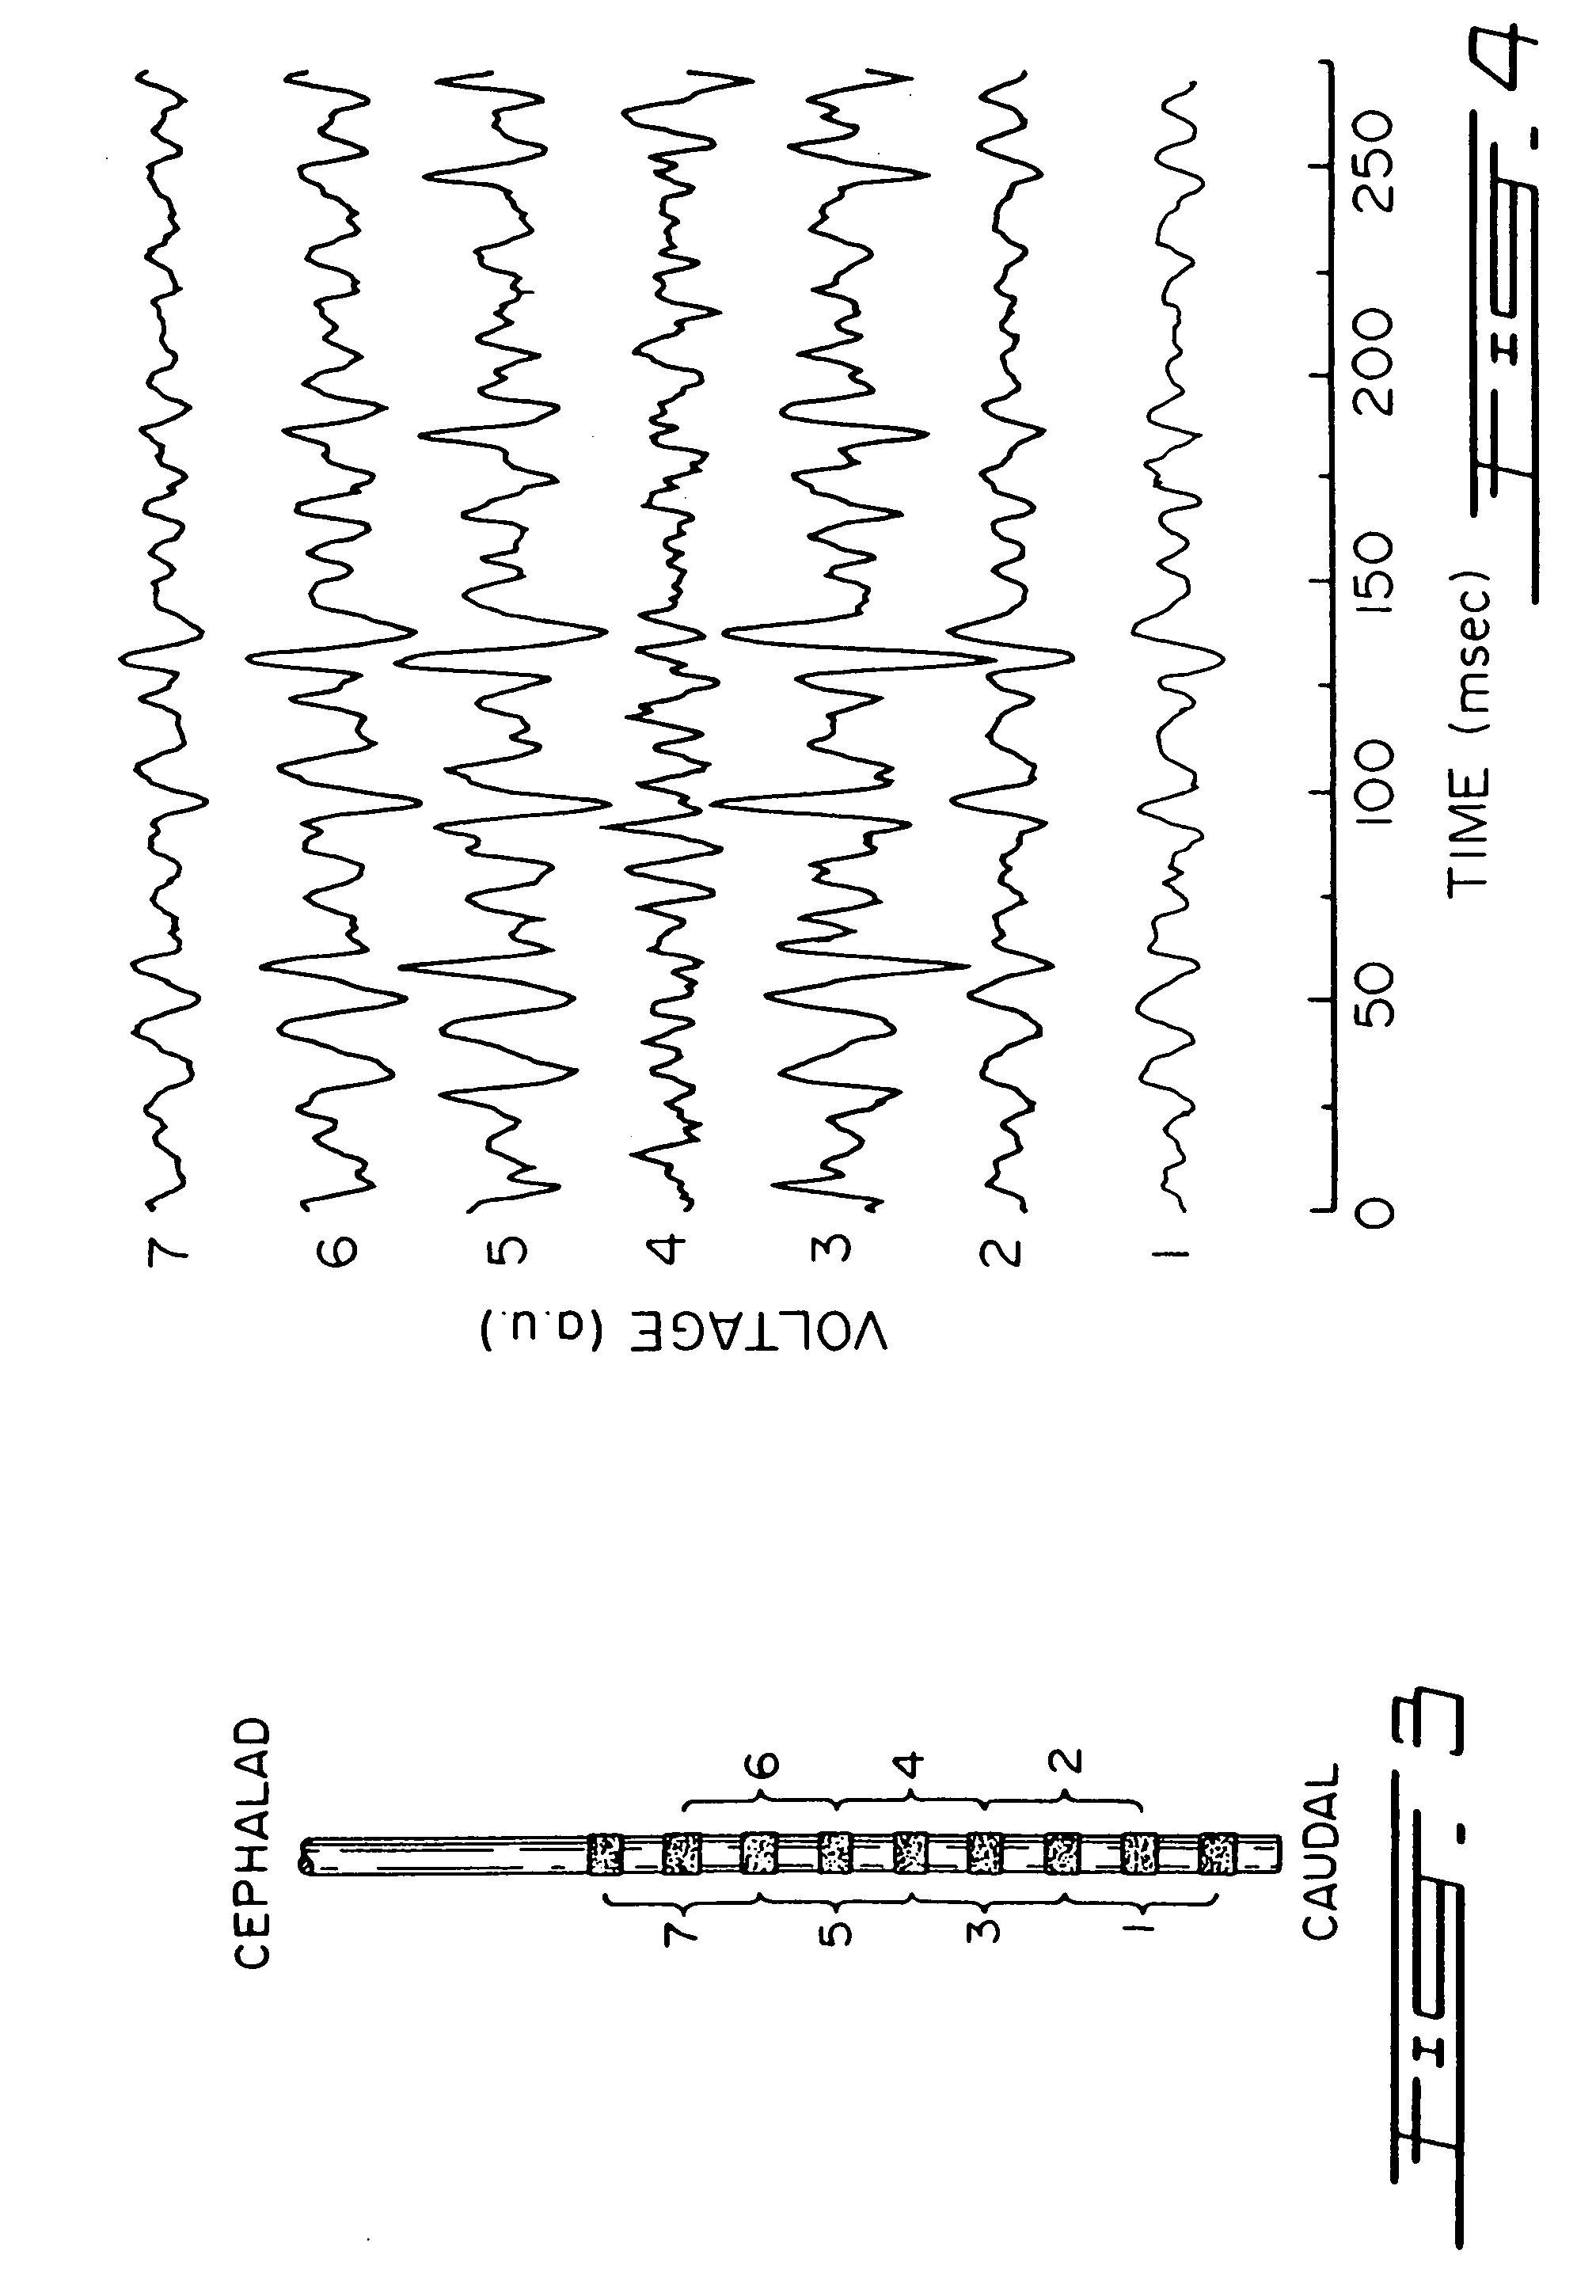 Target drive ventilation gain controller and method